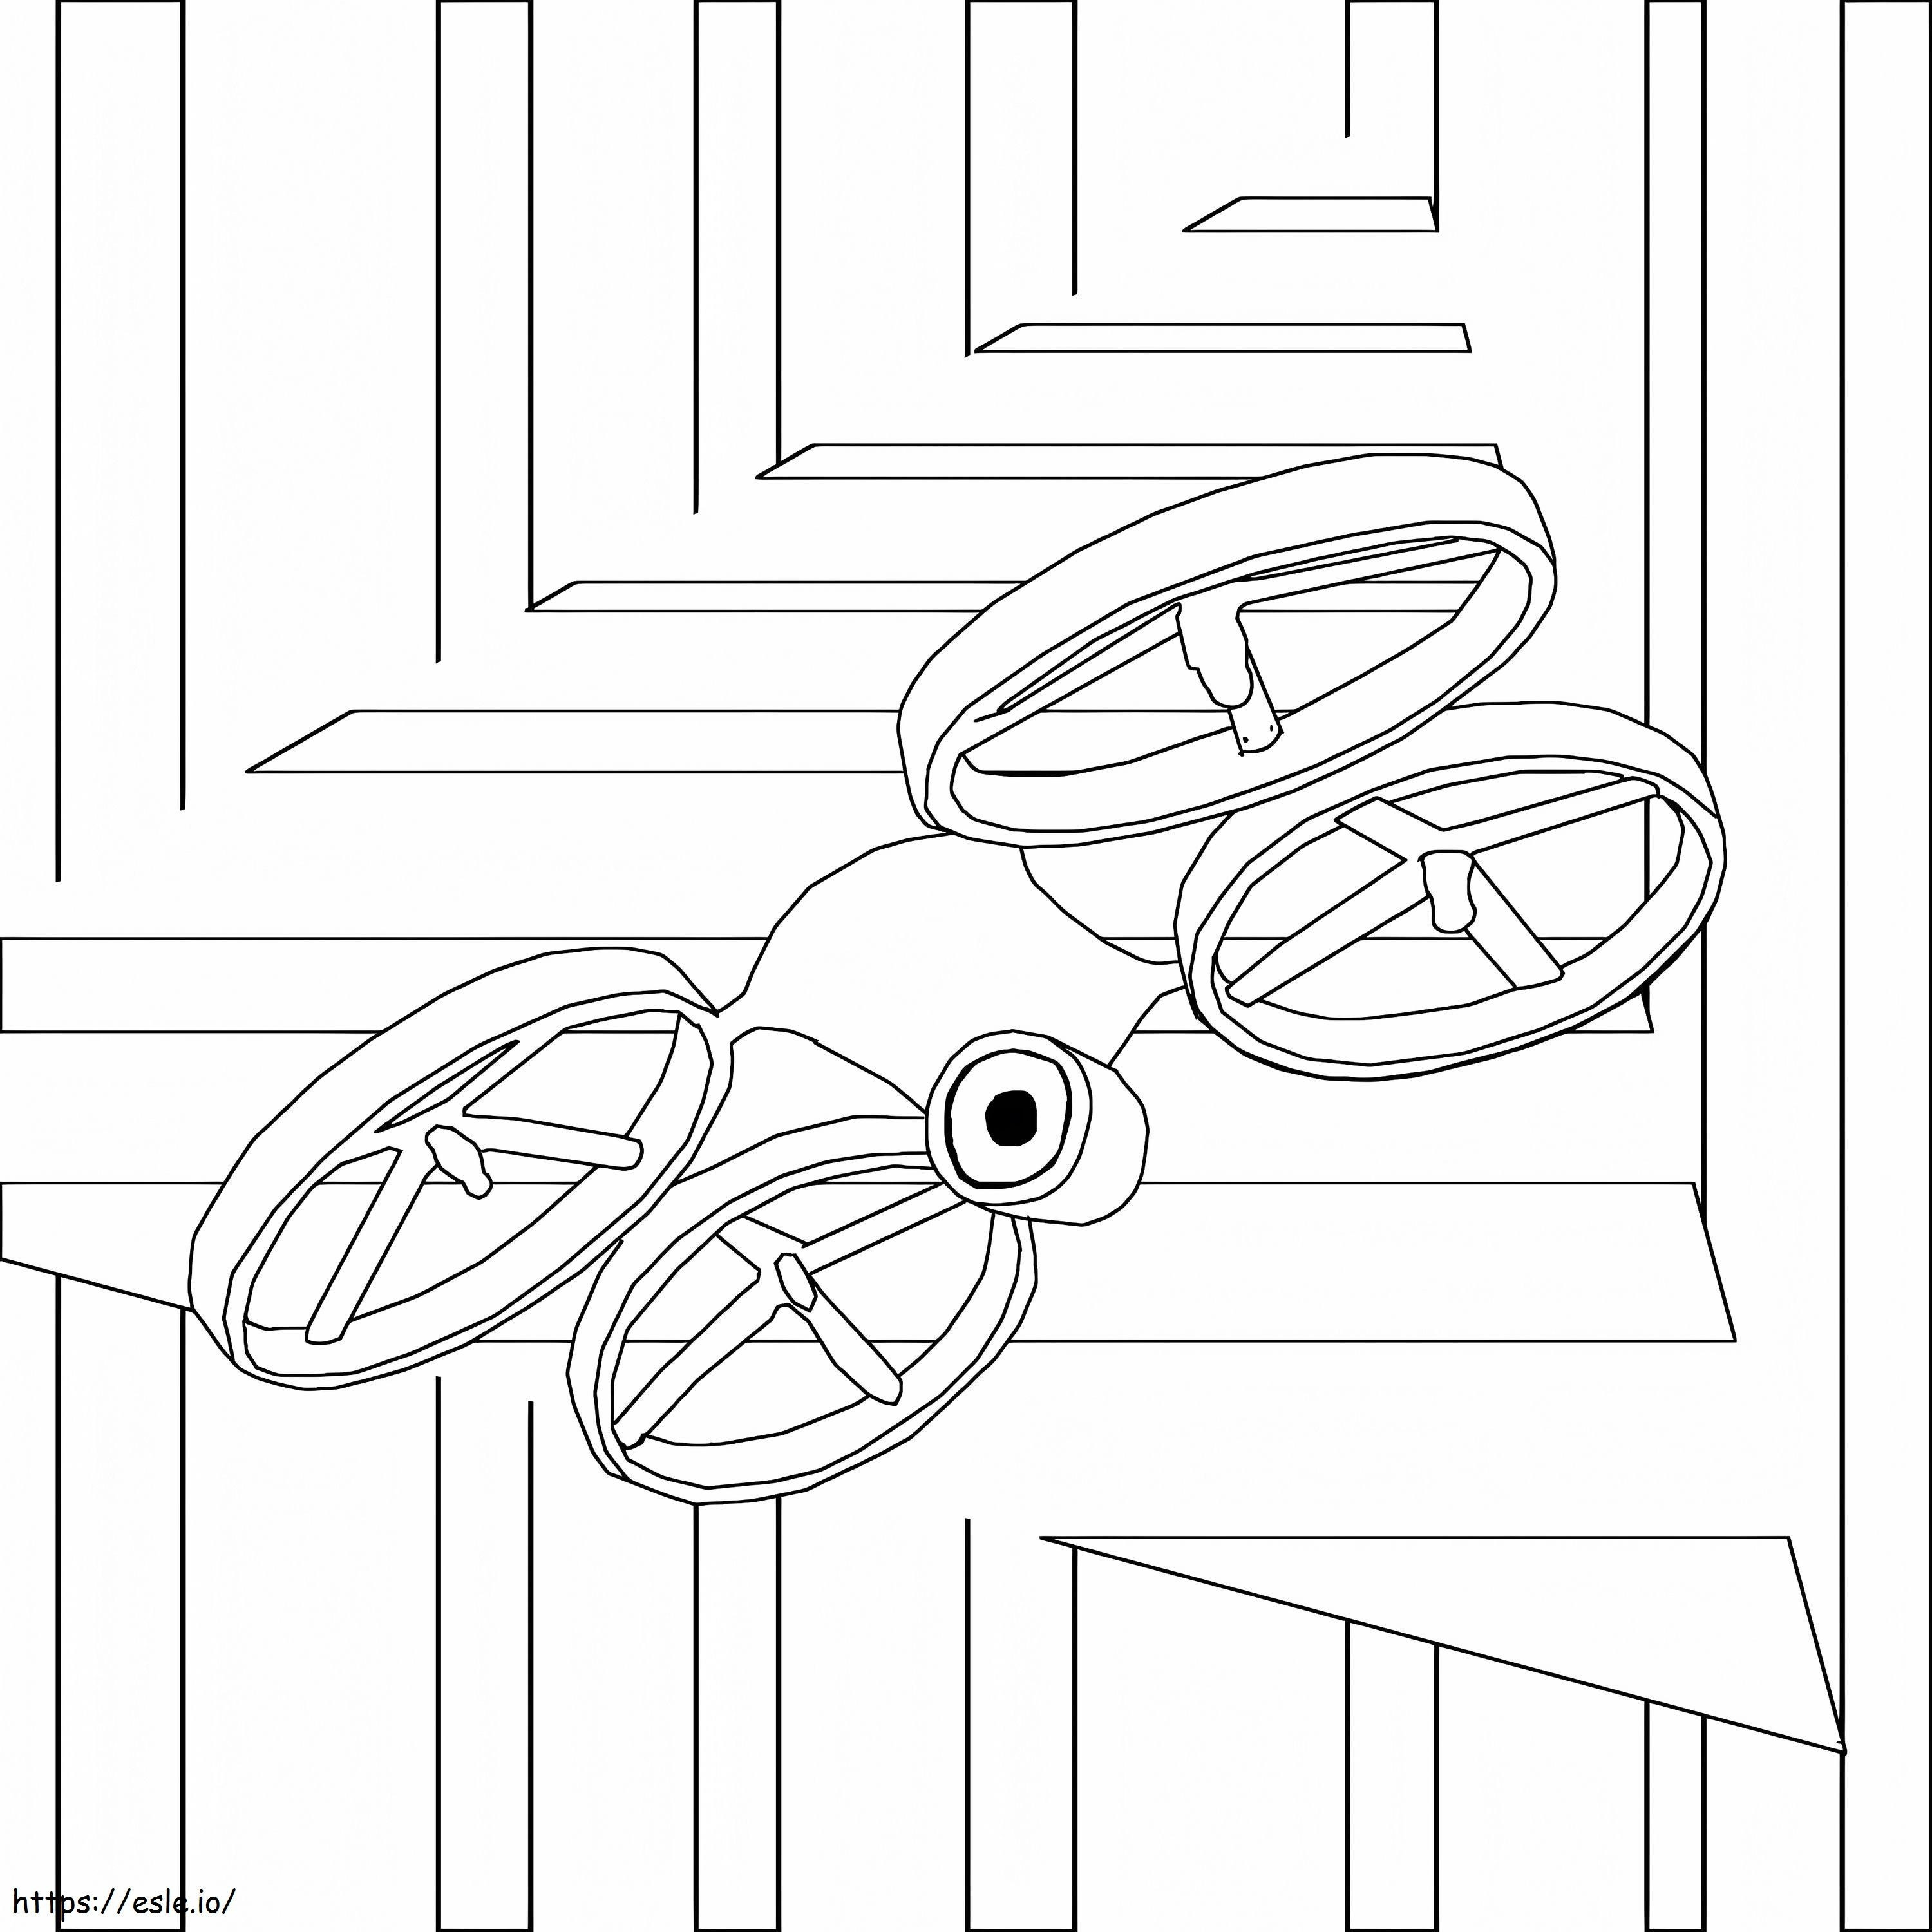 Free Drone coloring page